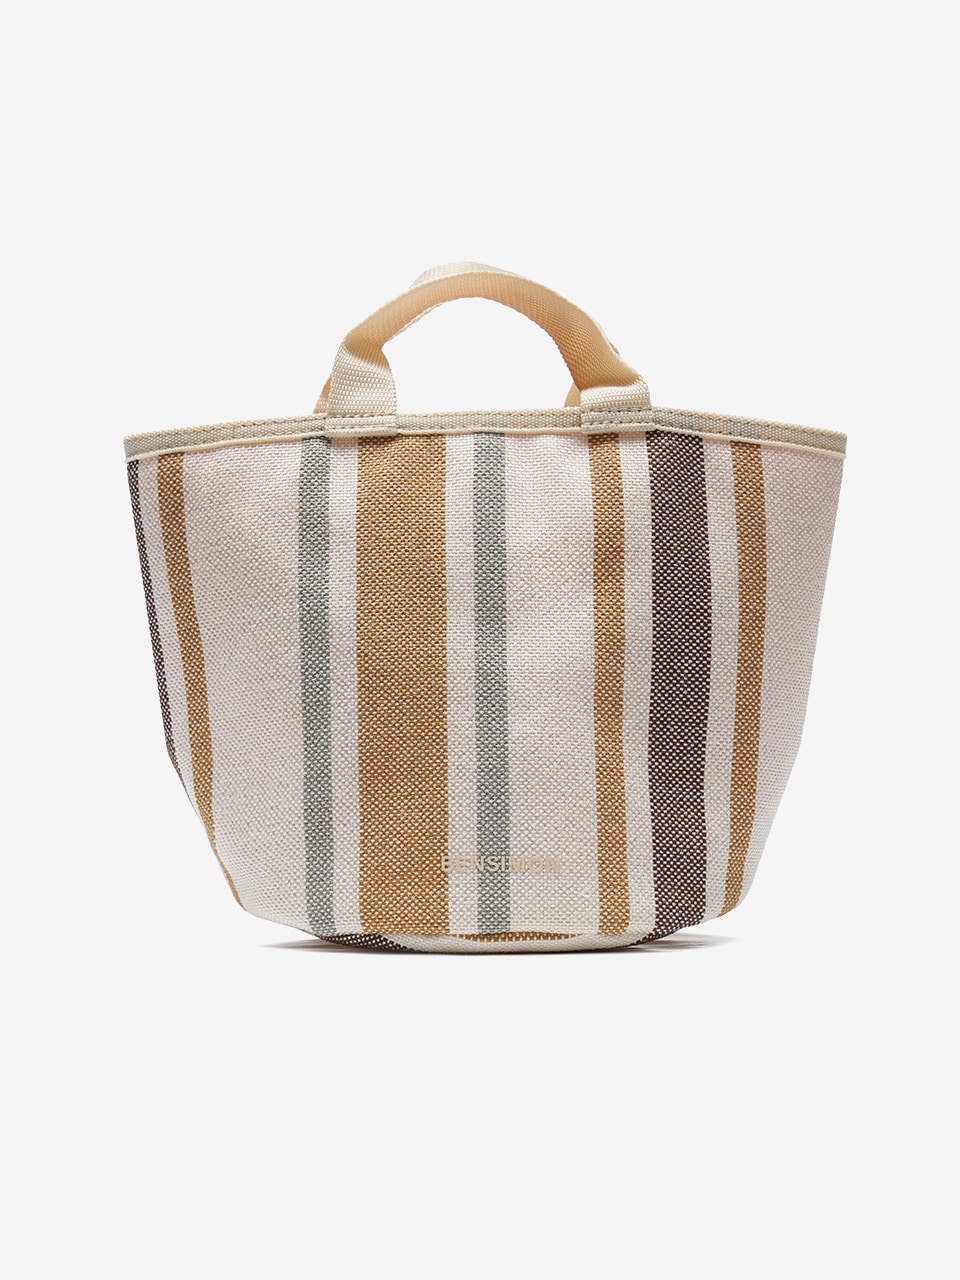 [PARIS COLLECTION] POLYESTER BUCKET STORAGE SMALL - CAMEL